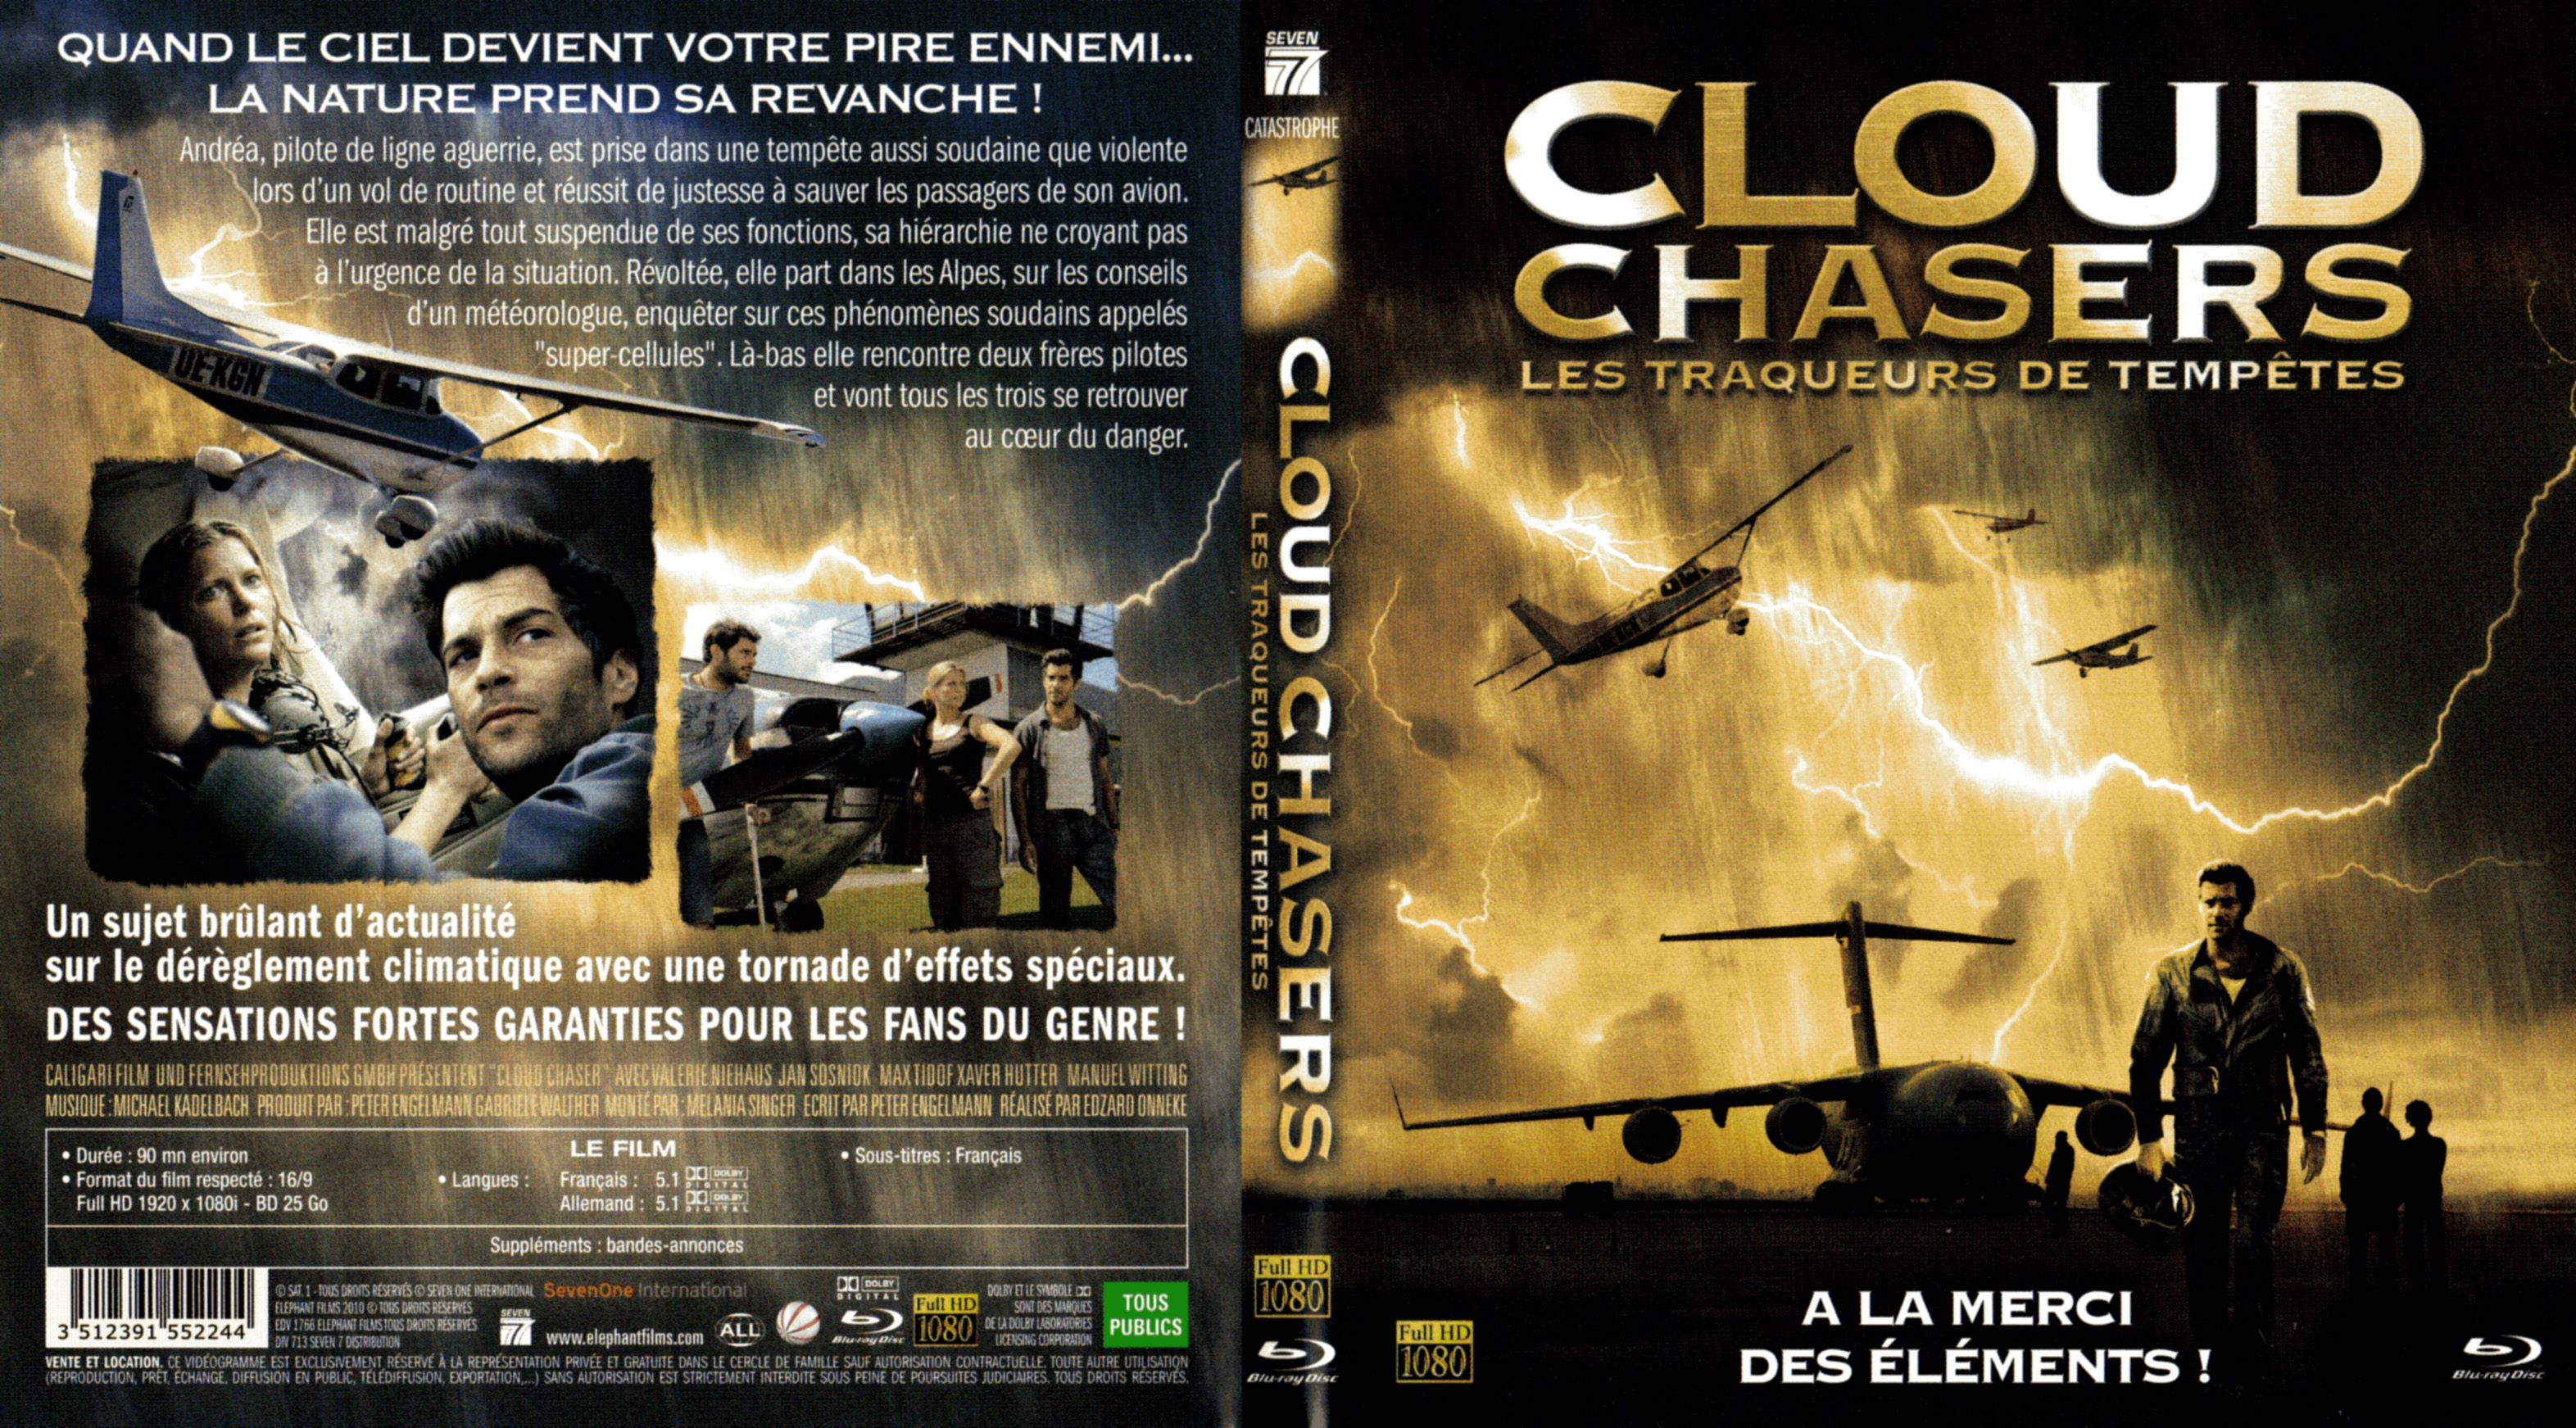 Jaquette DVD Cloud chasers (BLU-RAY)